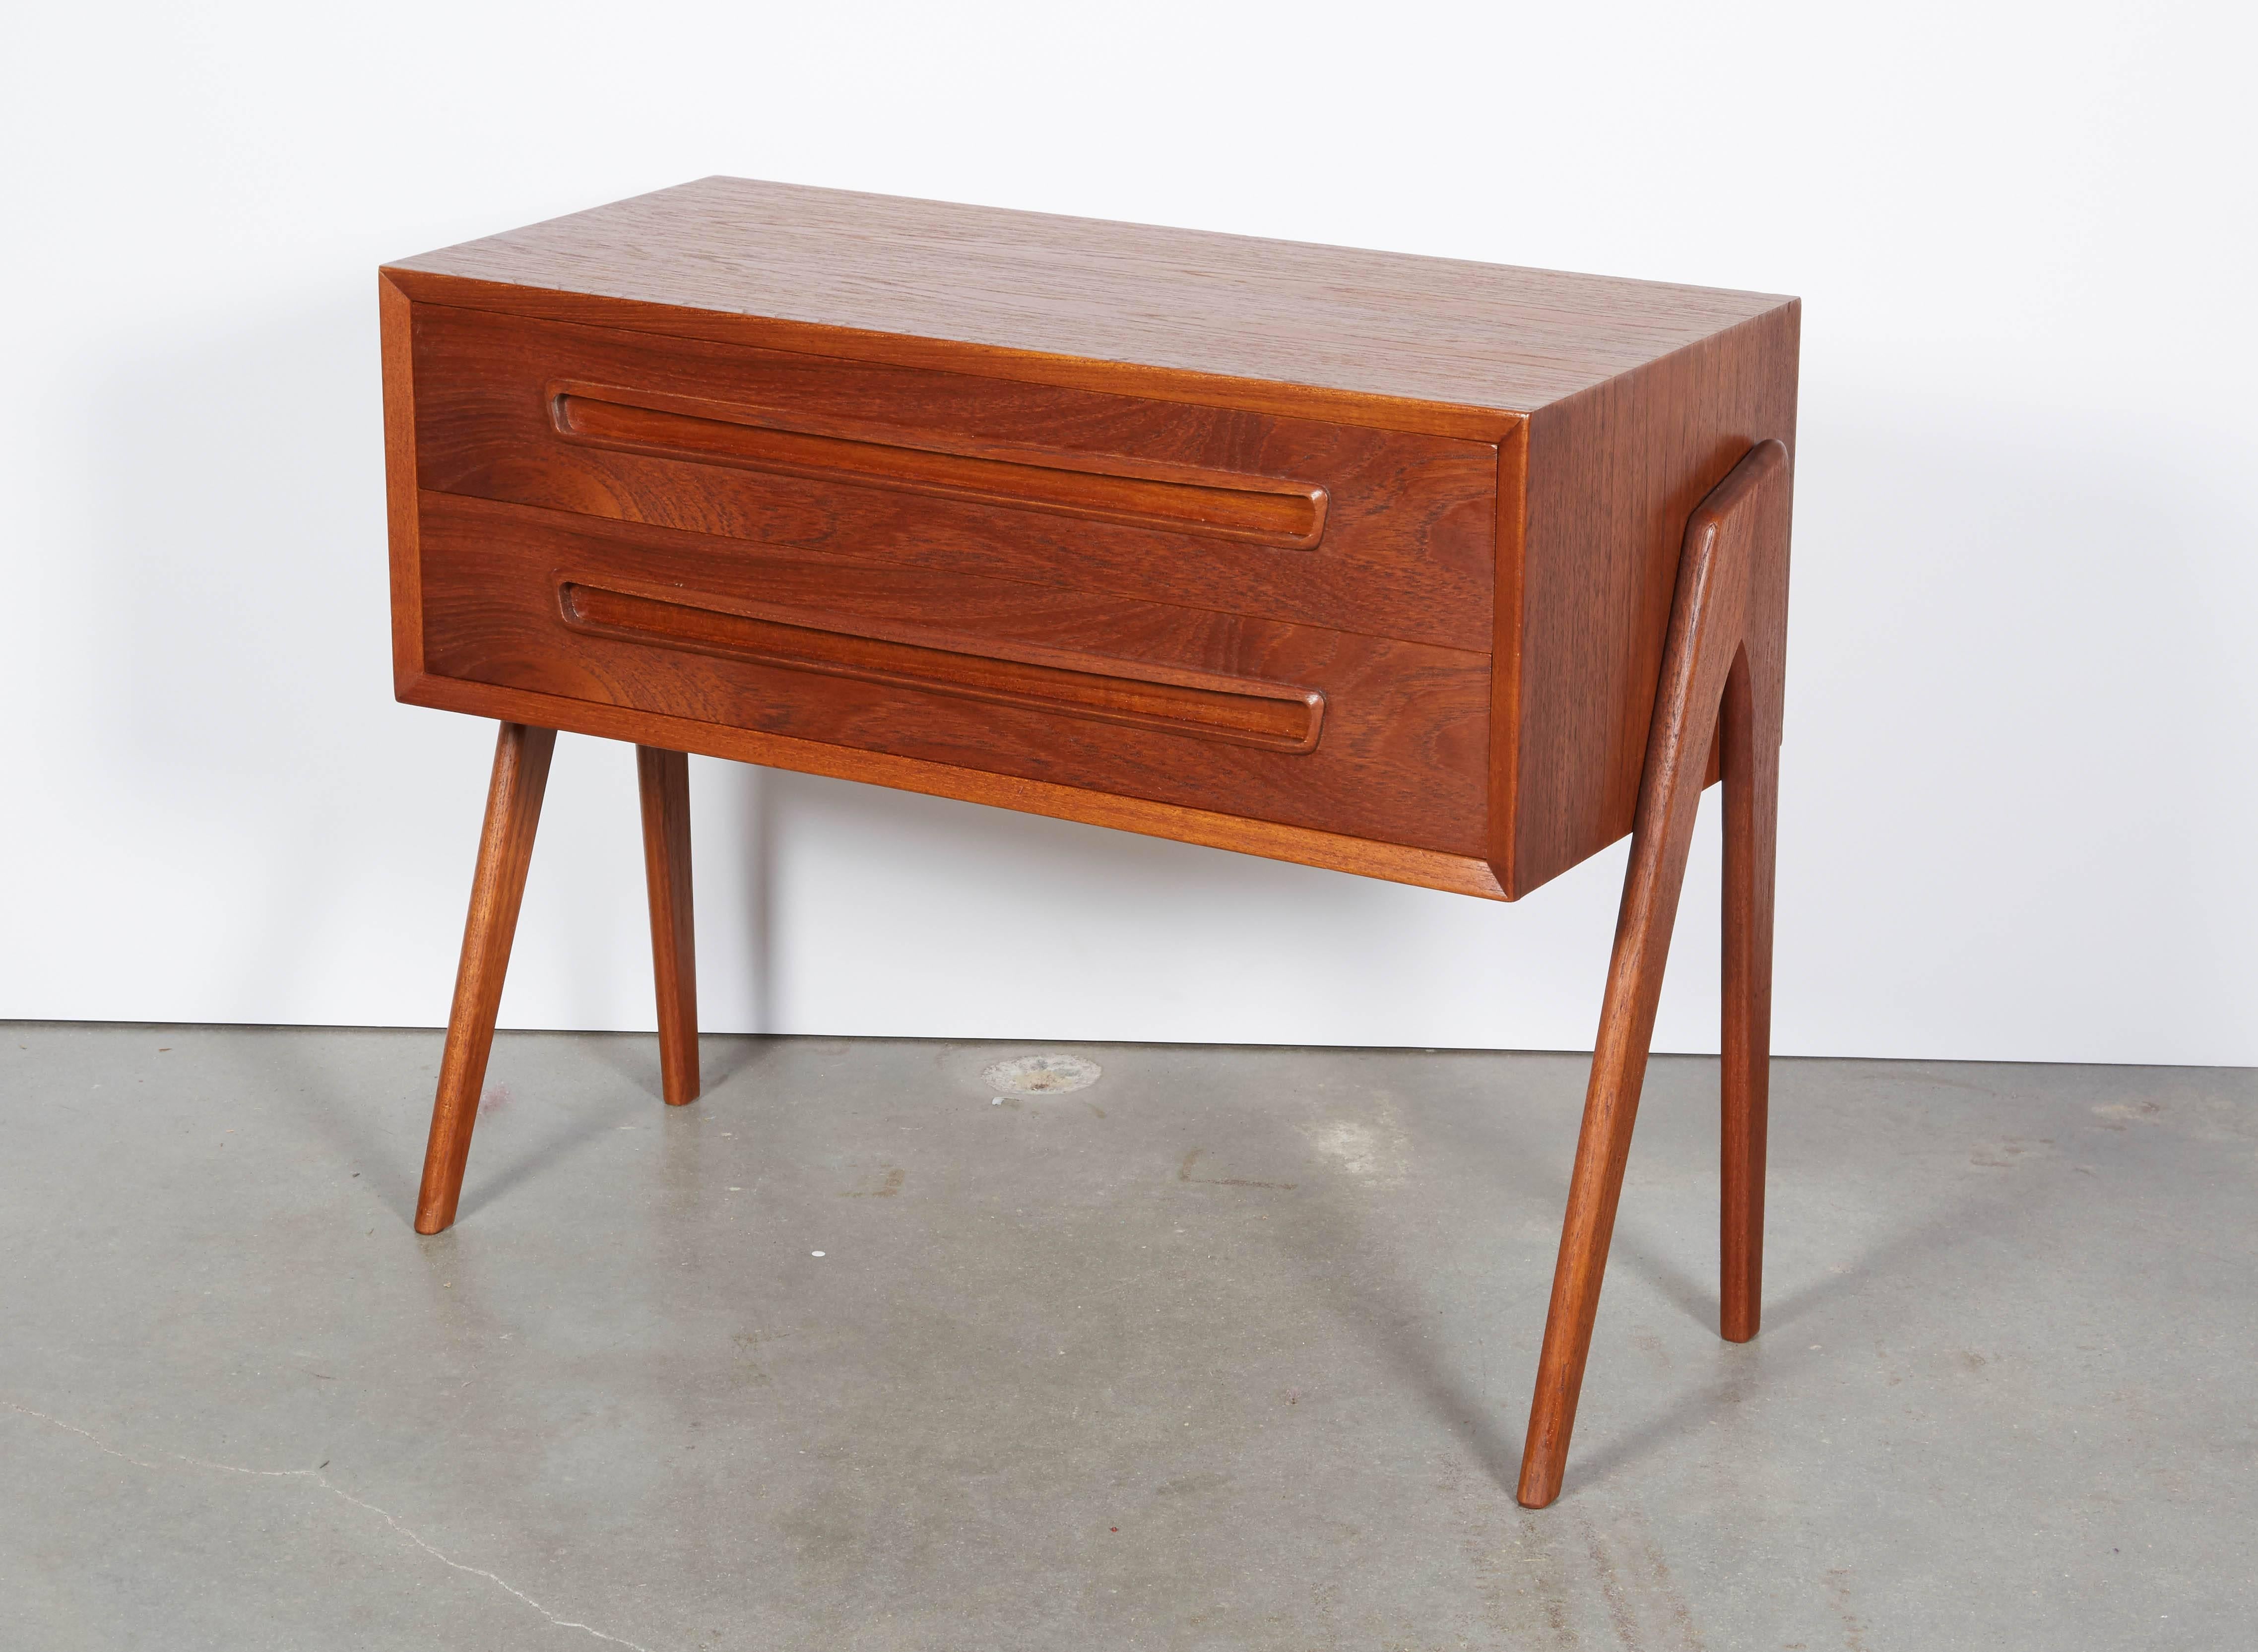 Vintage 1950s Teak Bedside Table

This mid century night stand goes harmoniously in many different decor environments. Can also be used around the house for extra storage. Ready for pick up, delivery, or shipping.